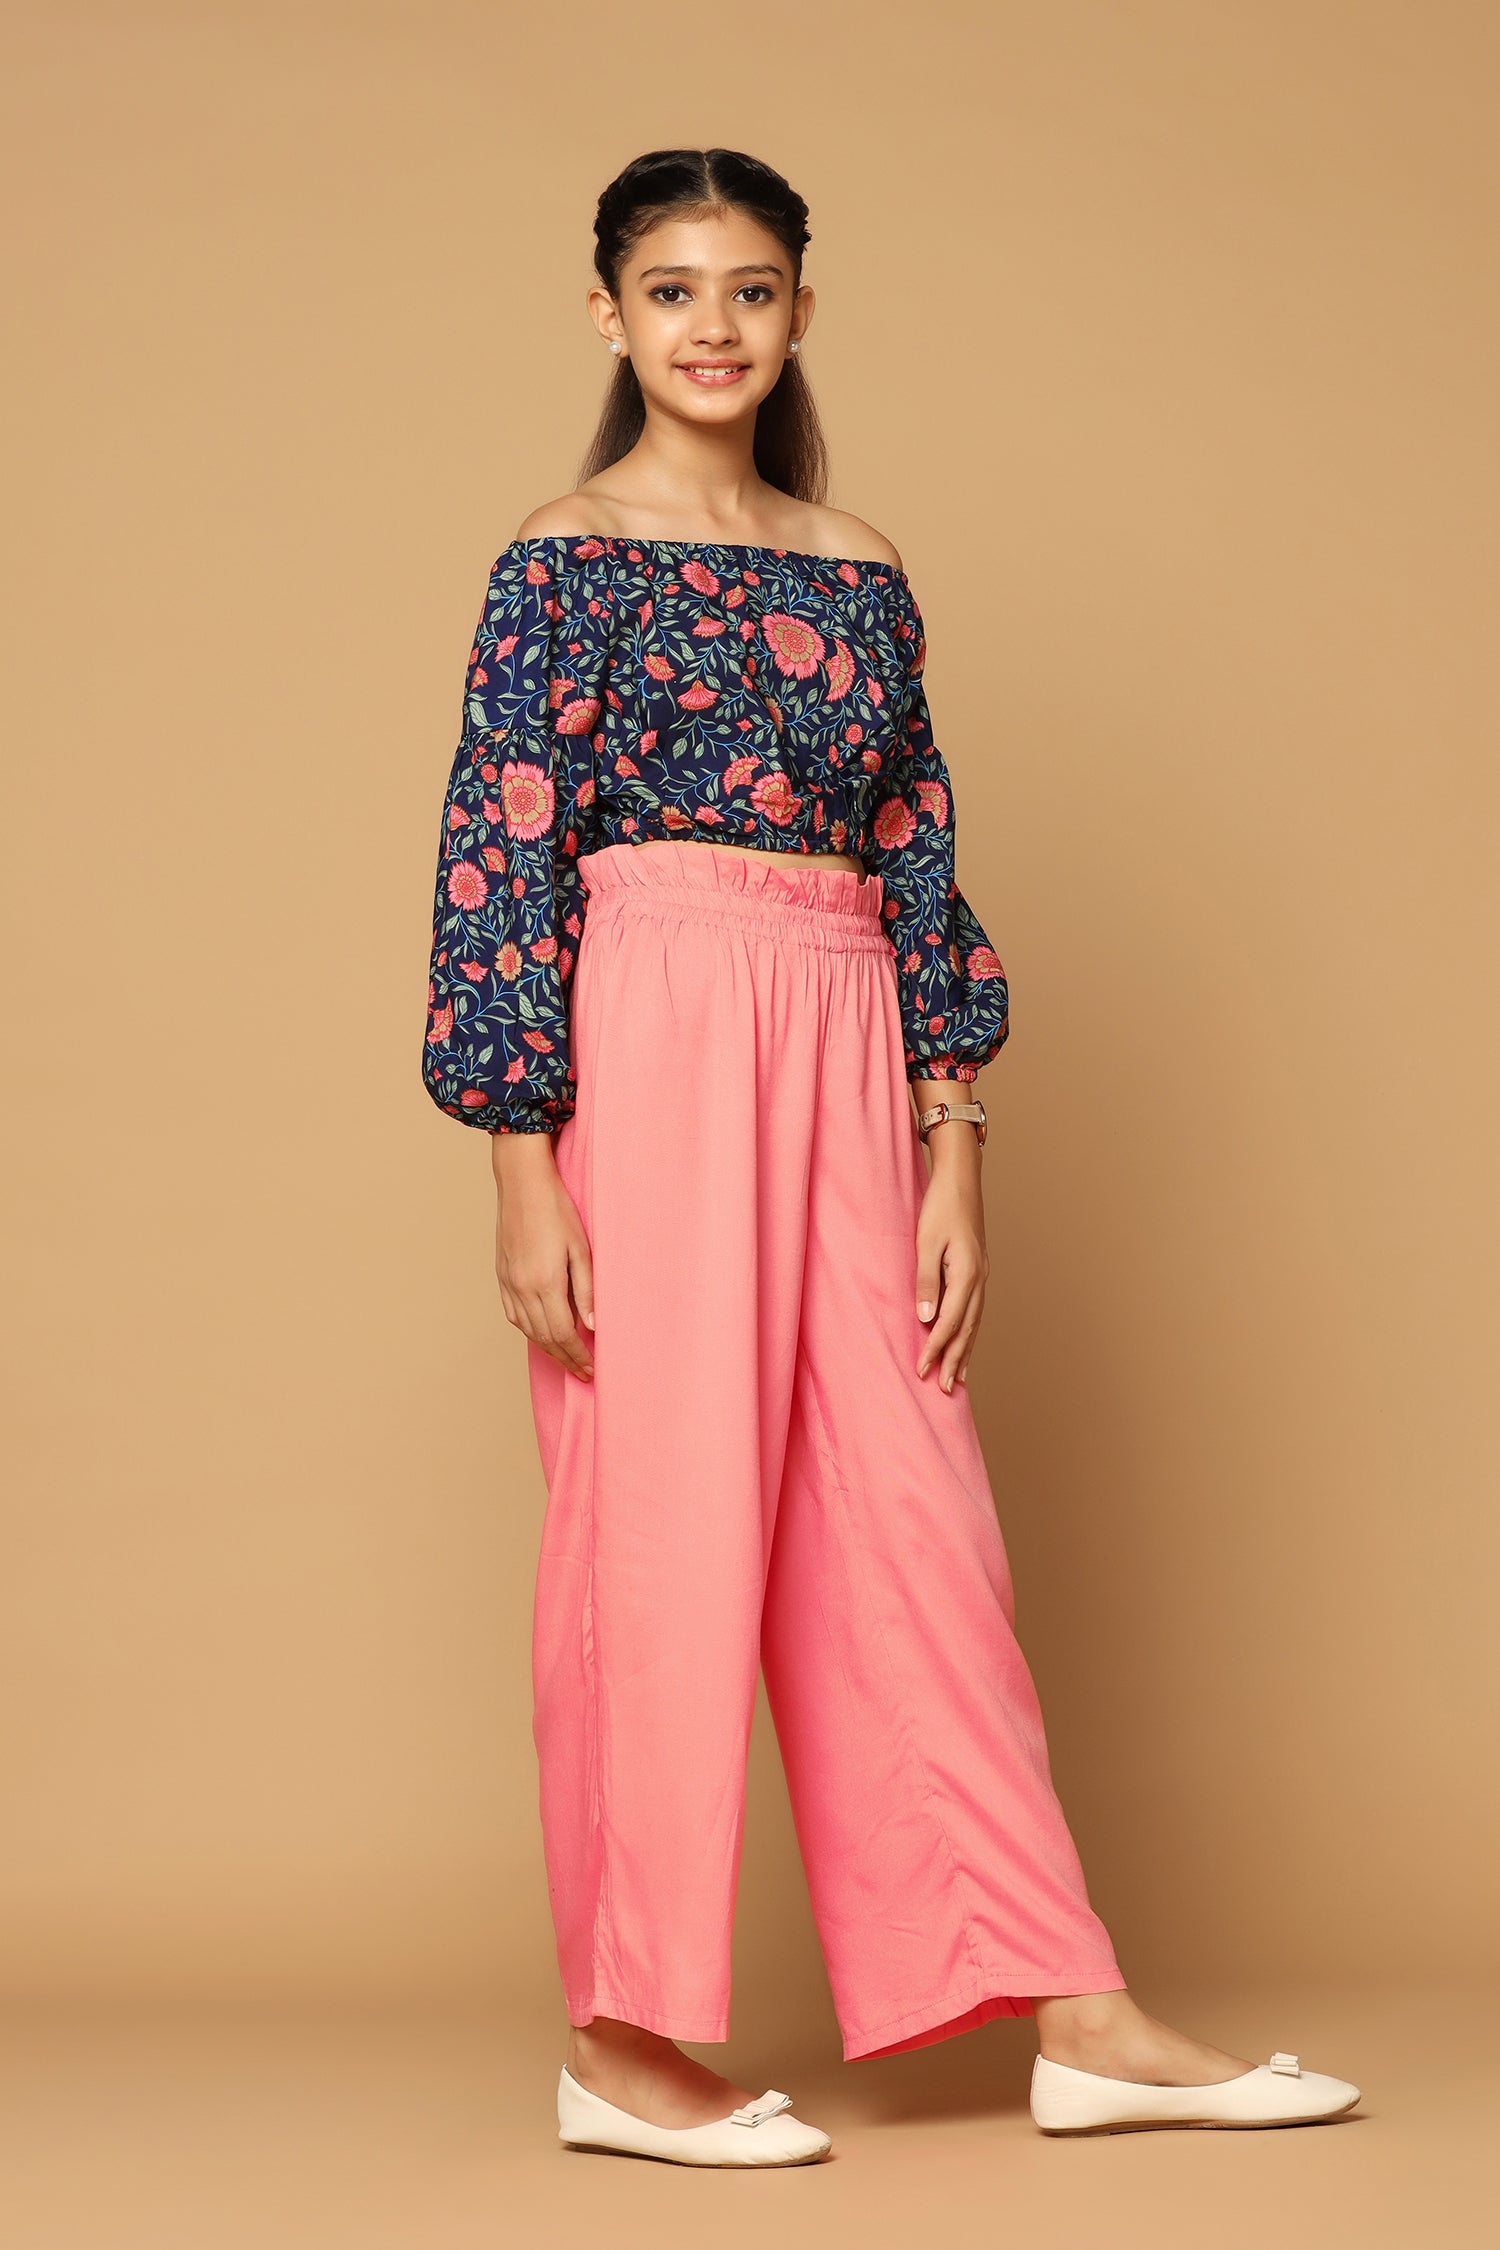 Buy Red Polycrepe Printed Floral Straight Sleeveless Crop Top And Pant Set  For Women by Pasha India Online at Aza Fashions.